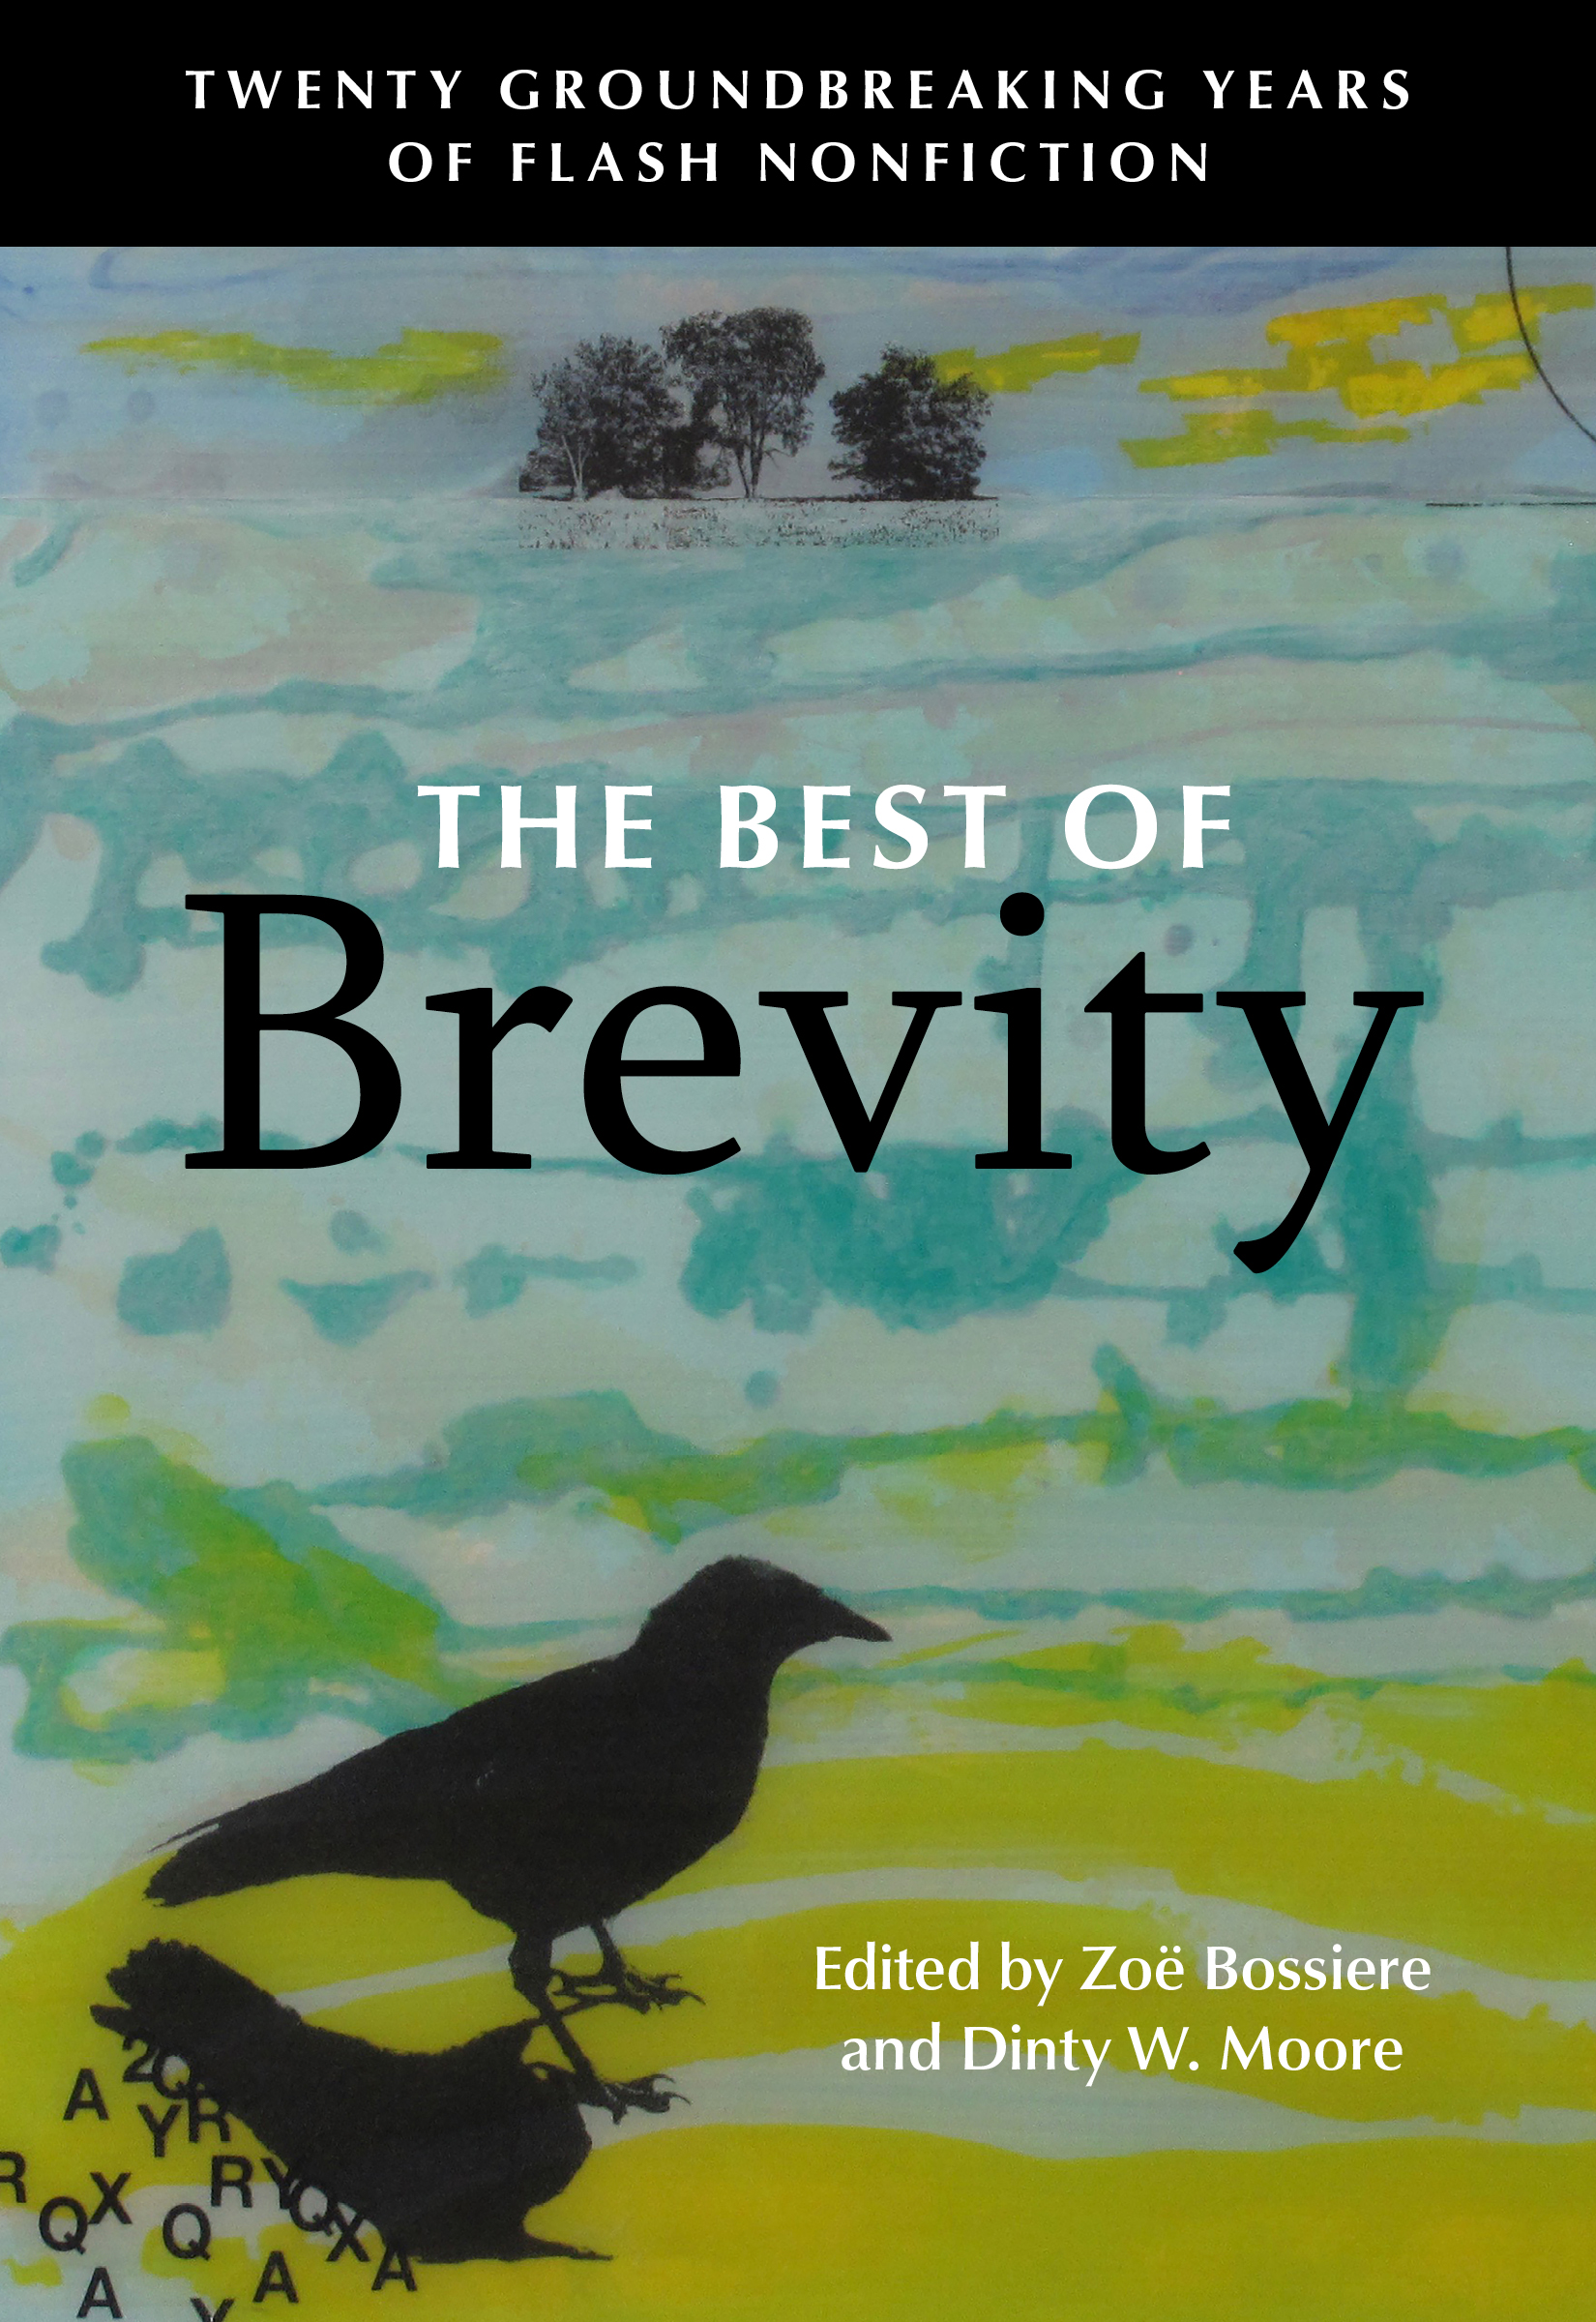 The Best of Brevity by Zoë Bossiere Free Download